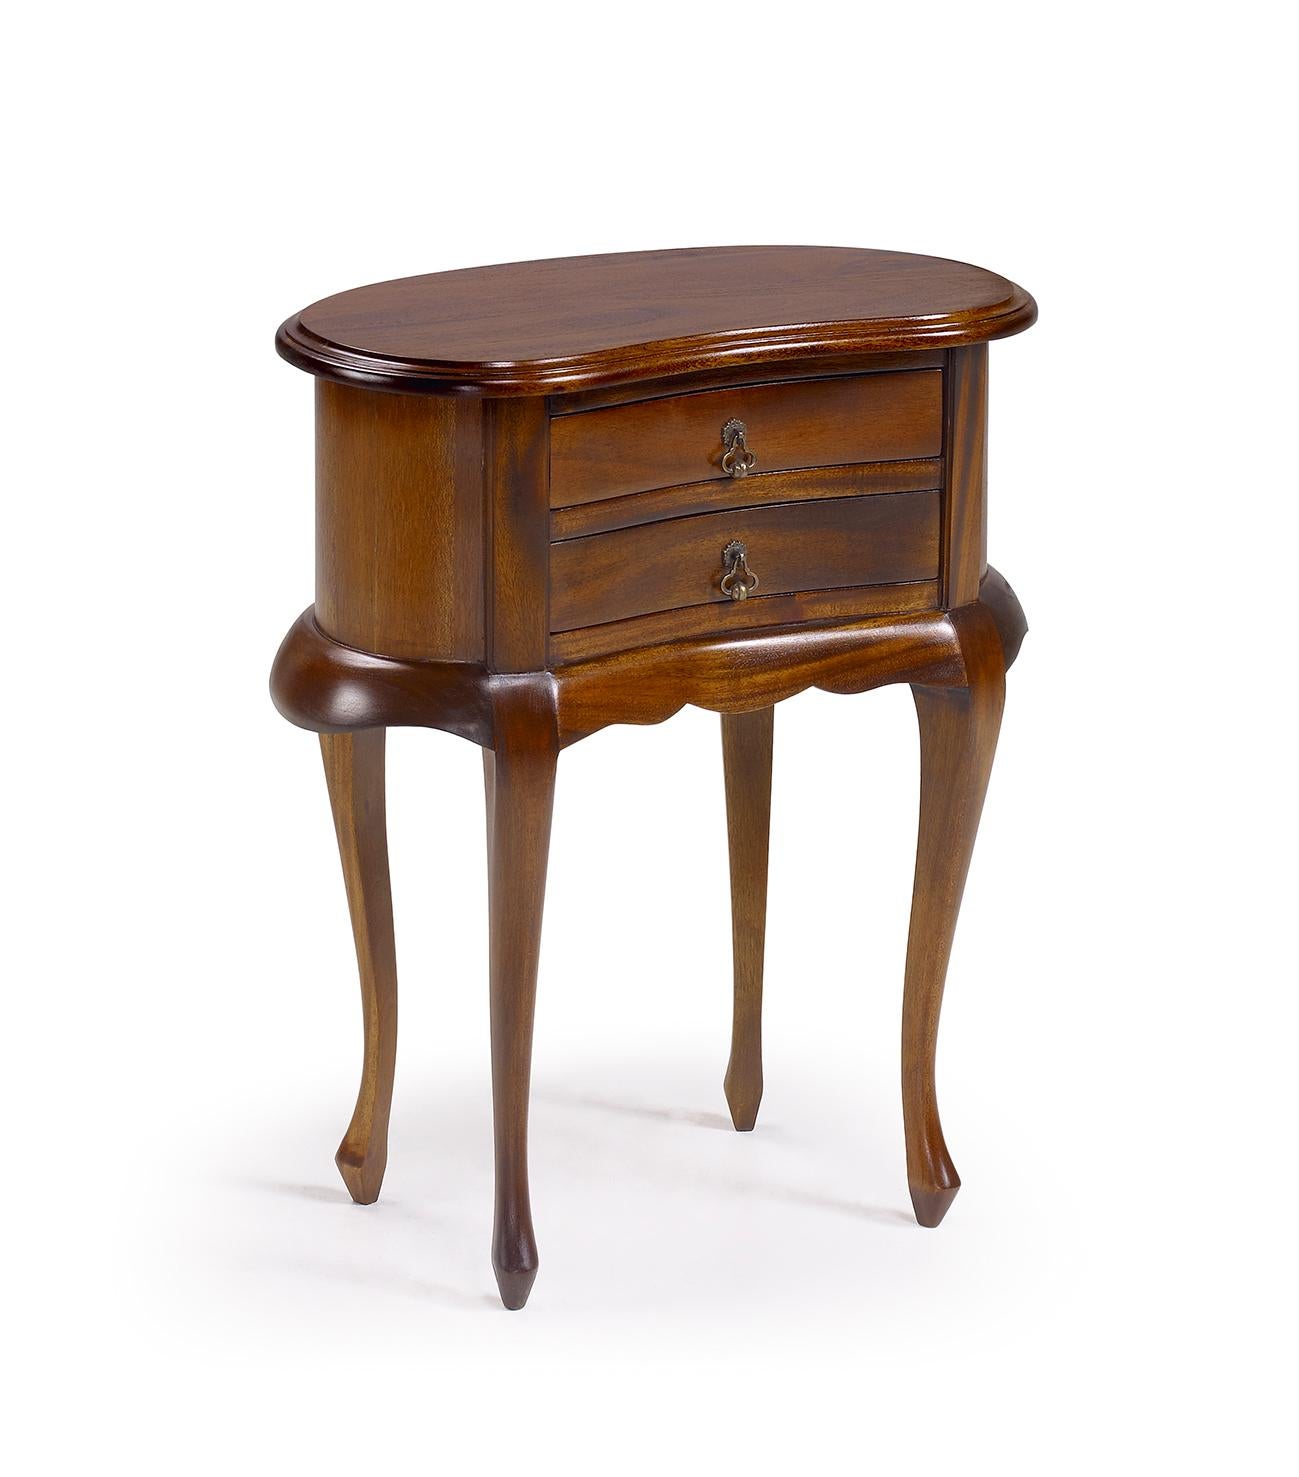 20th century pair of mahogany nightstands with kidney shape and two drawers.